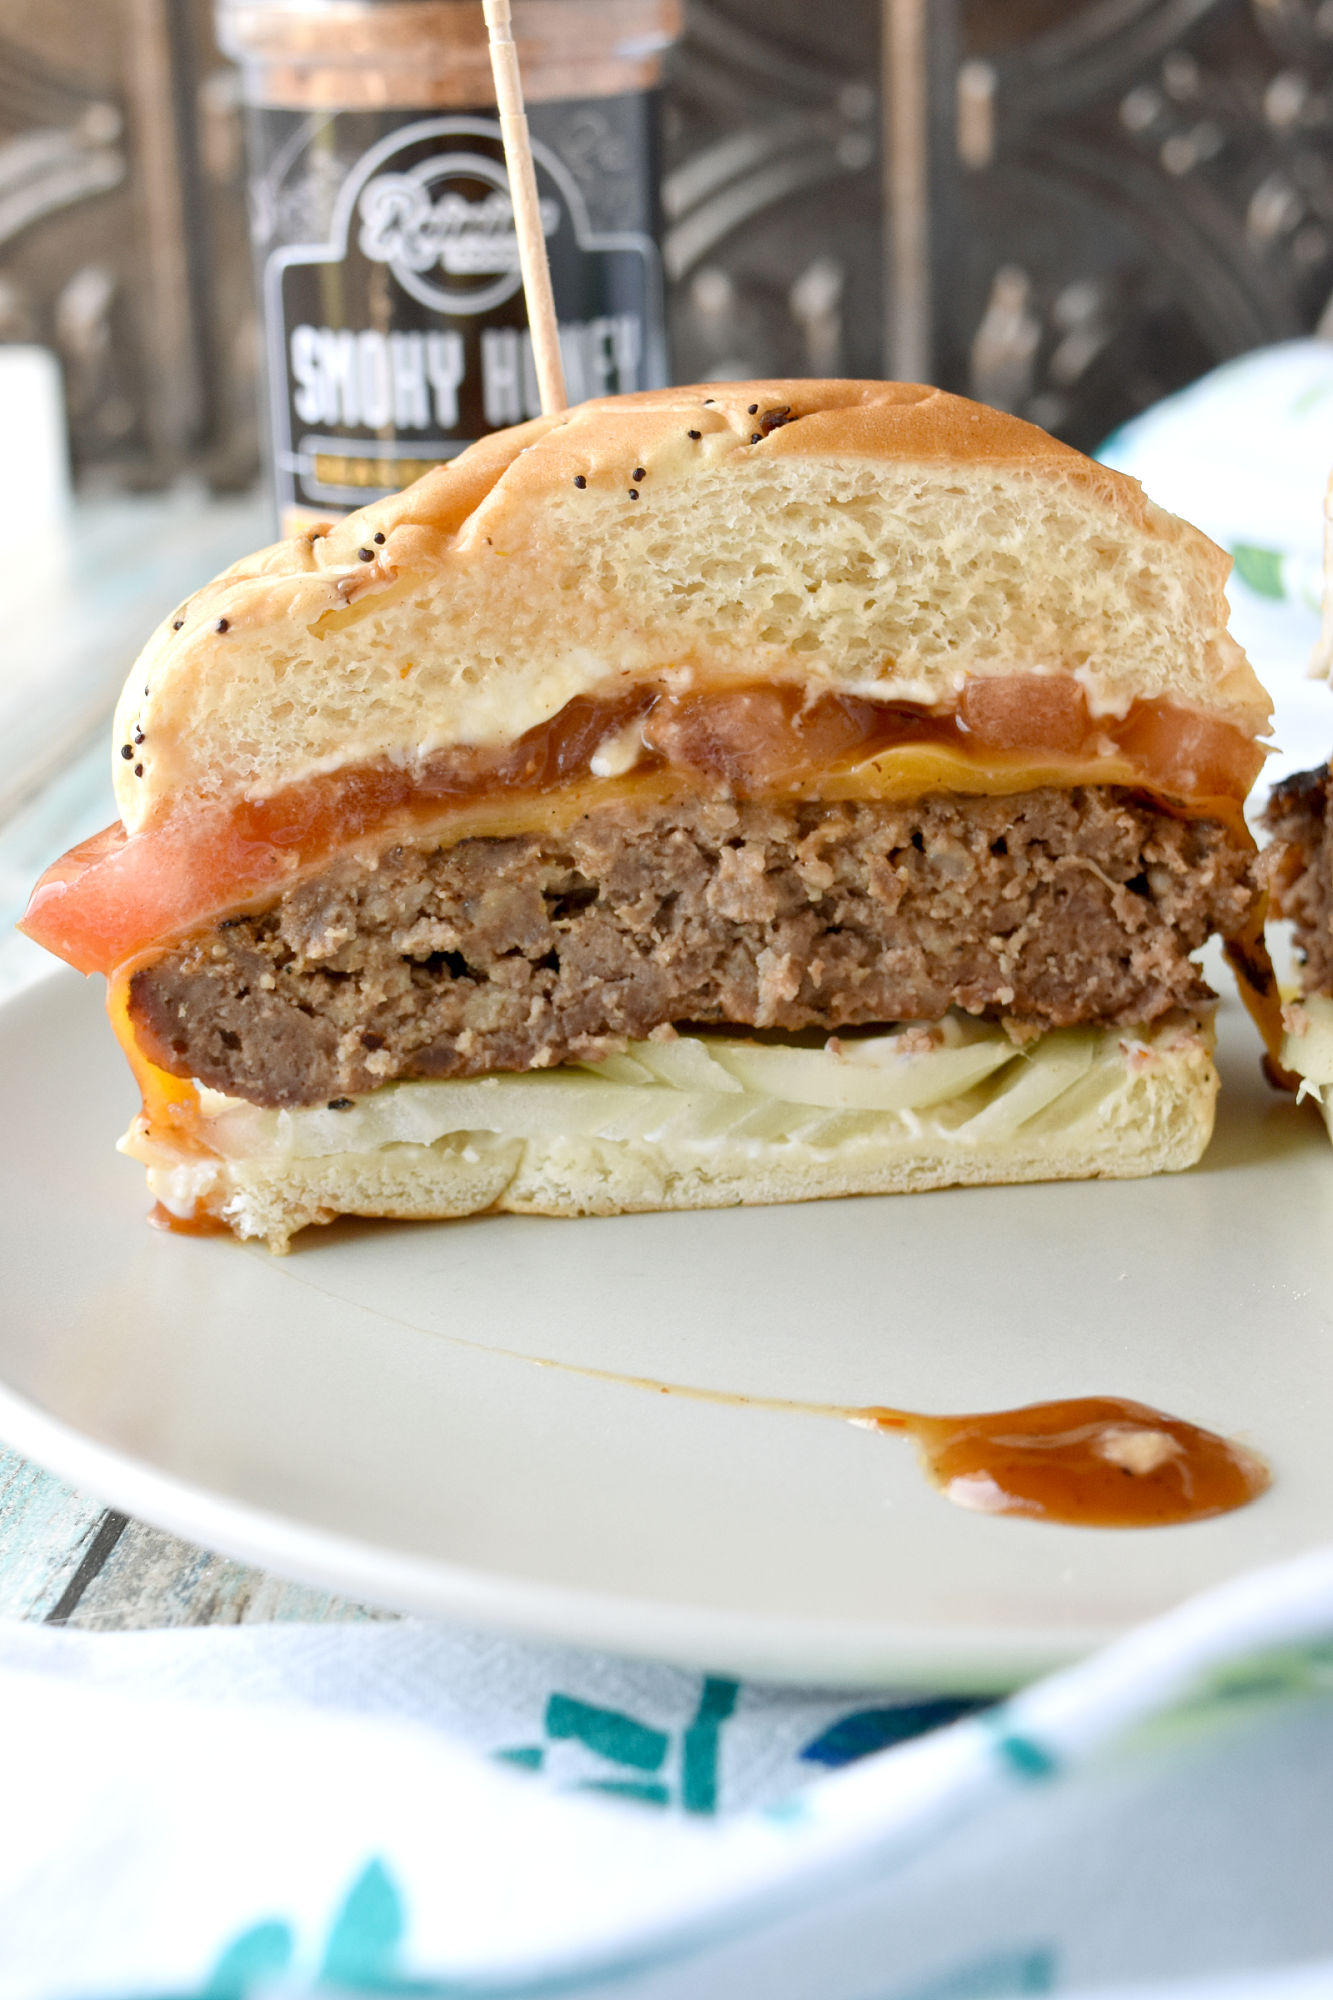 Barbecued Pork Burgers not only have barbecue sauce, but also a Smoky Honey seasoning bland that makes them smoky and sweet.  #BBQWeek